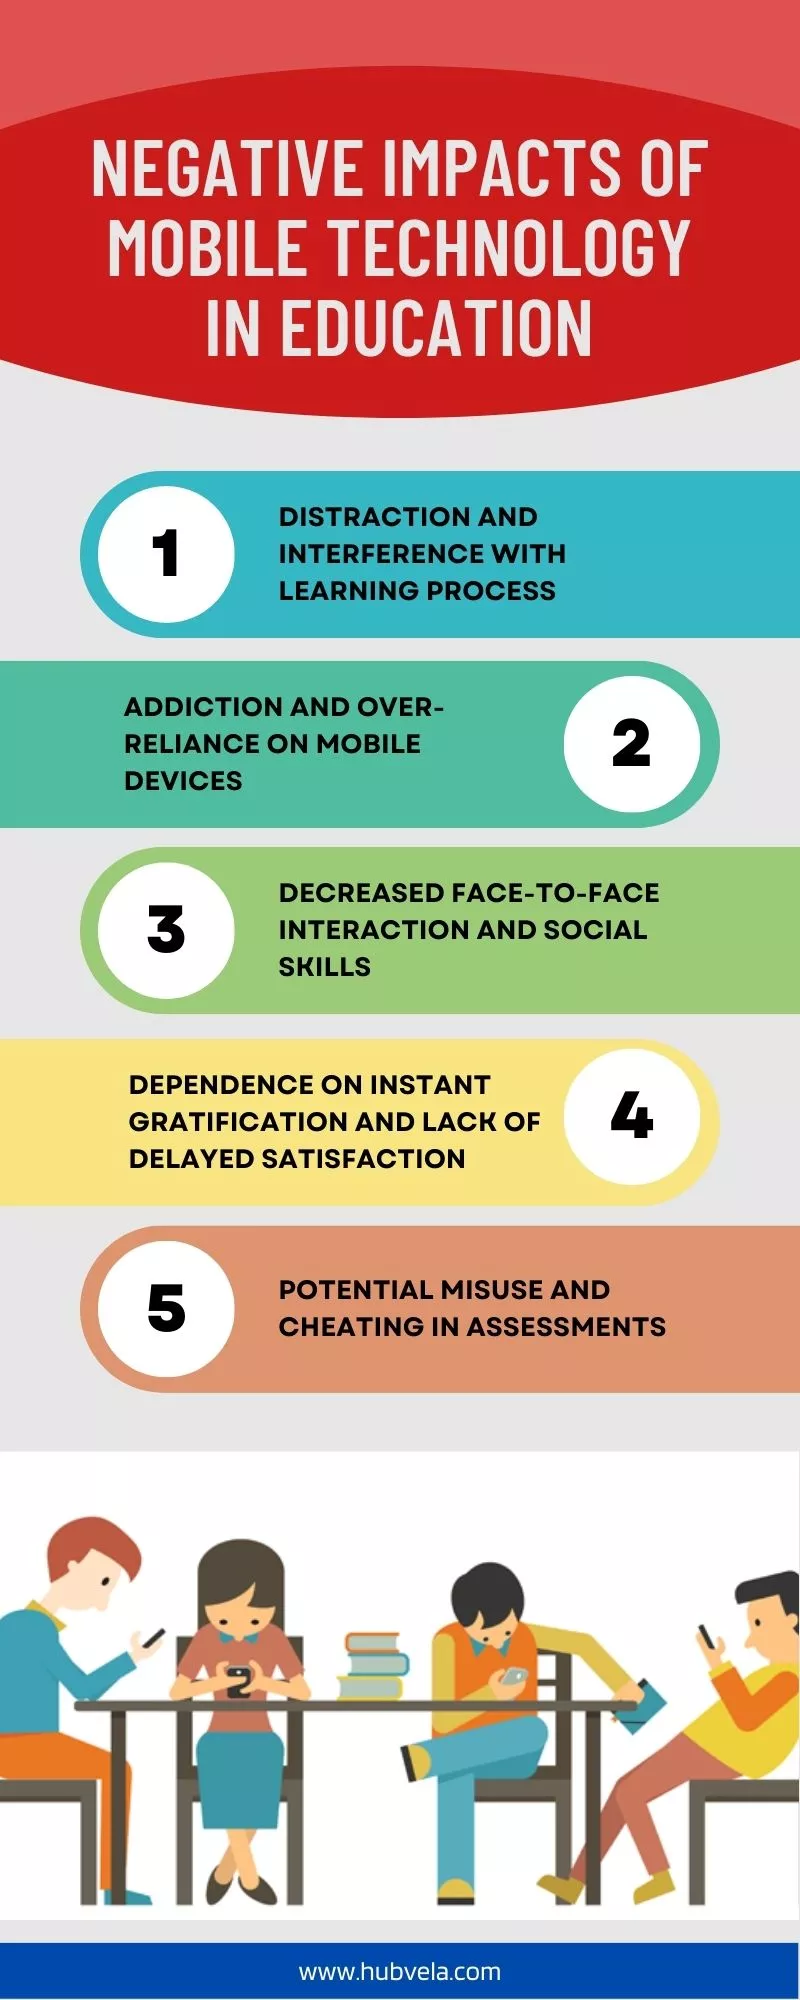 Negative Impacts of Mobile Technology in Education infographic